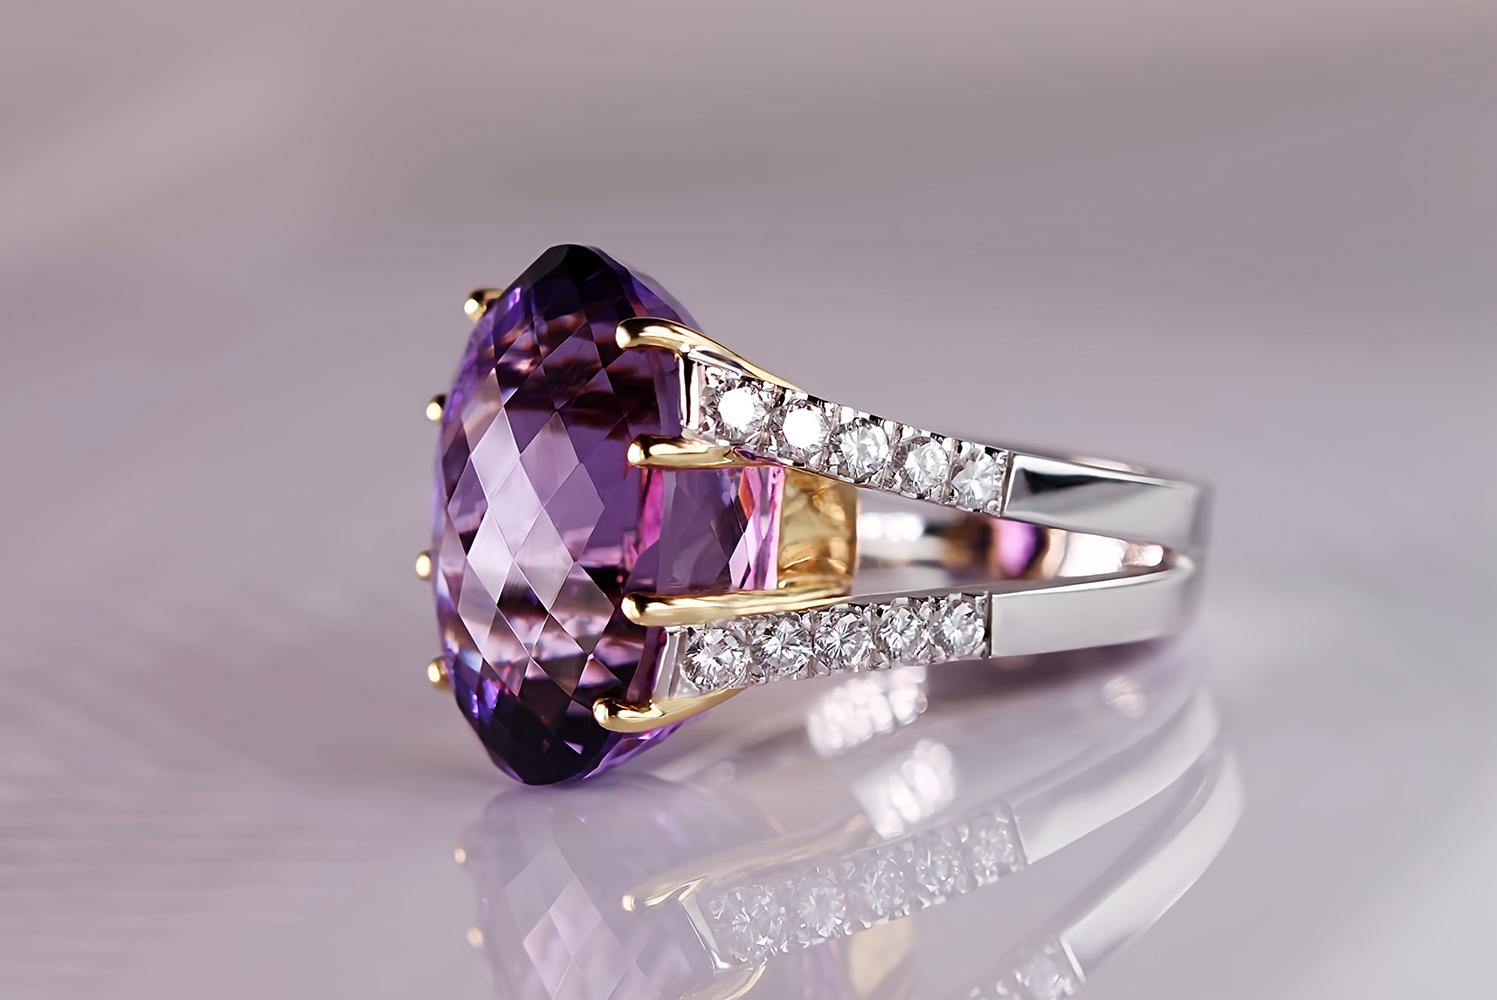 Oval Cut Statement 39.25 ct Amethyst & 1.03 ct Diamond Ring in Elegant 18kt White & Yello For Sale